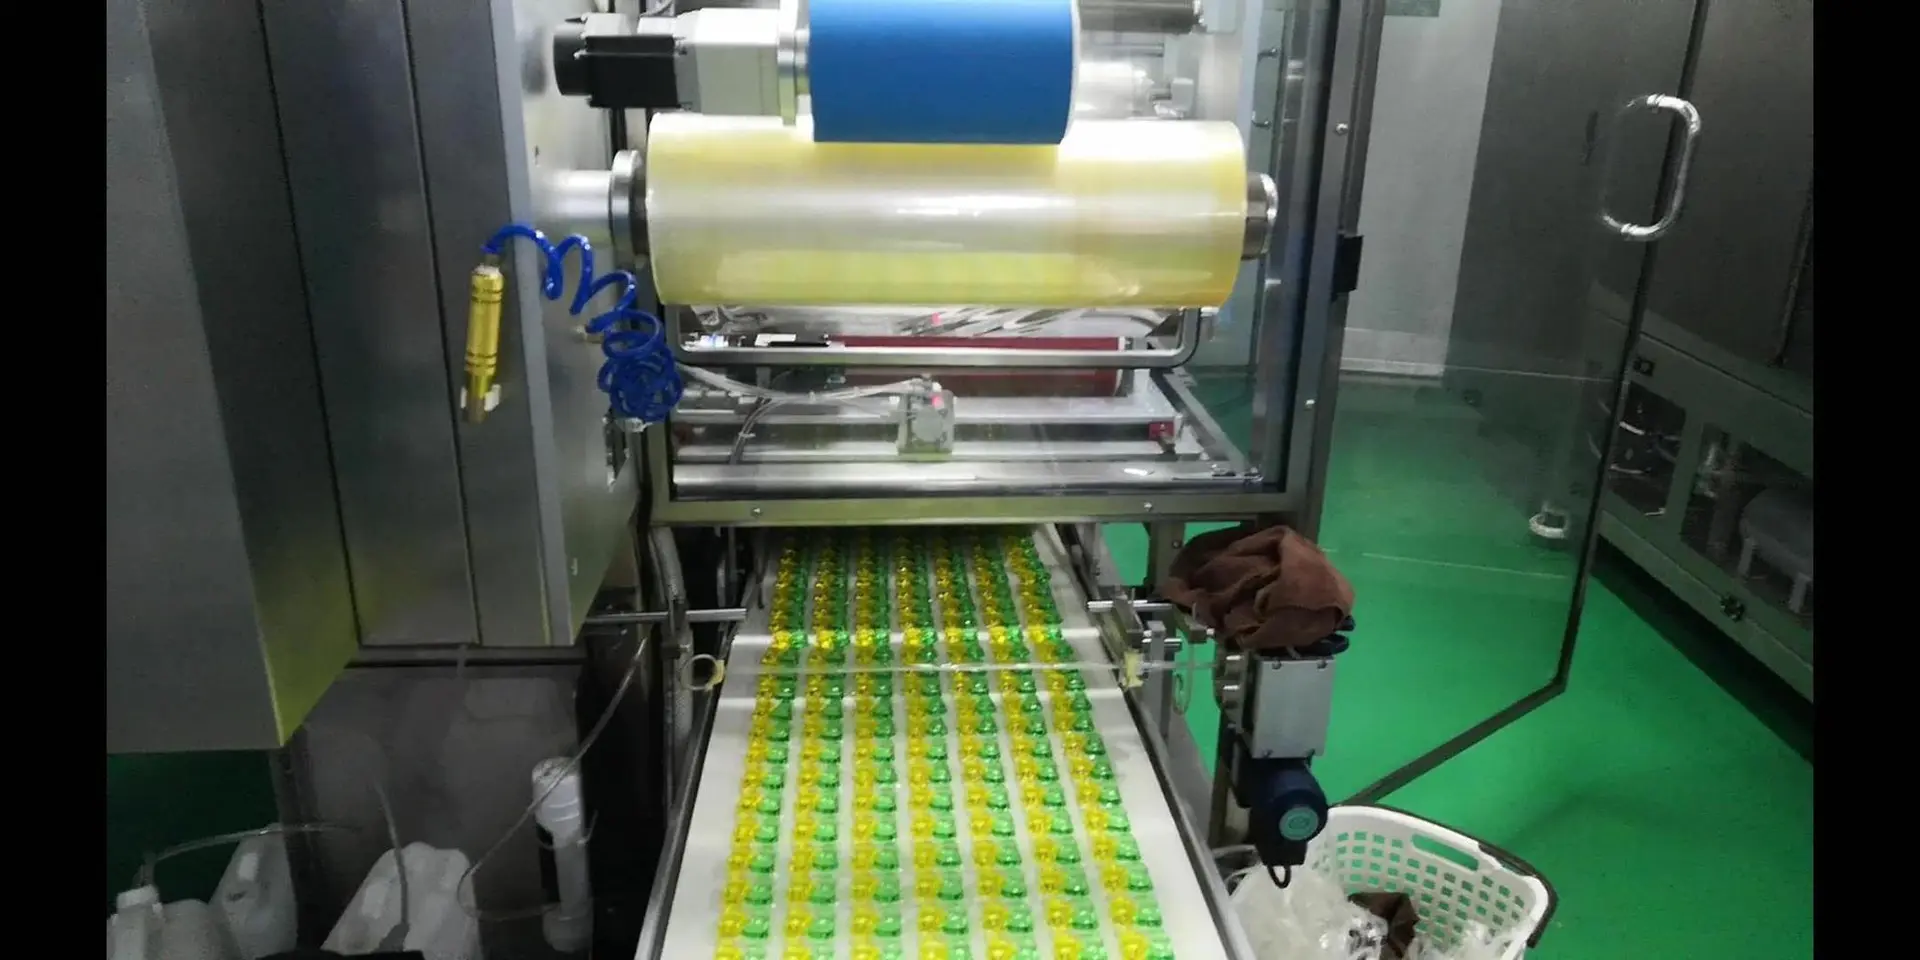 long warranty period automatic independently developed laundry pods packaging machine